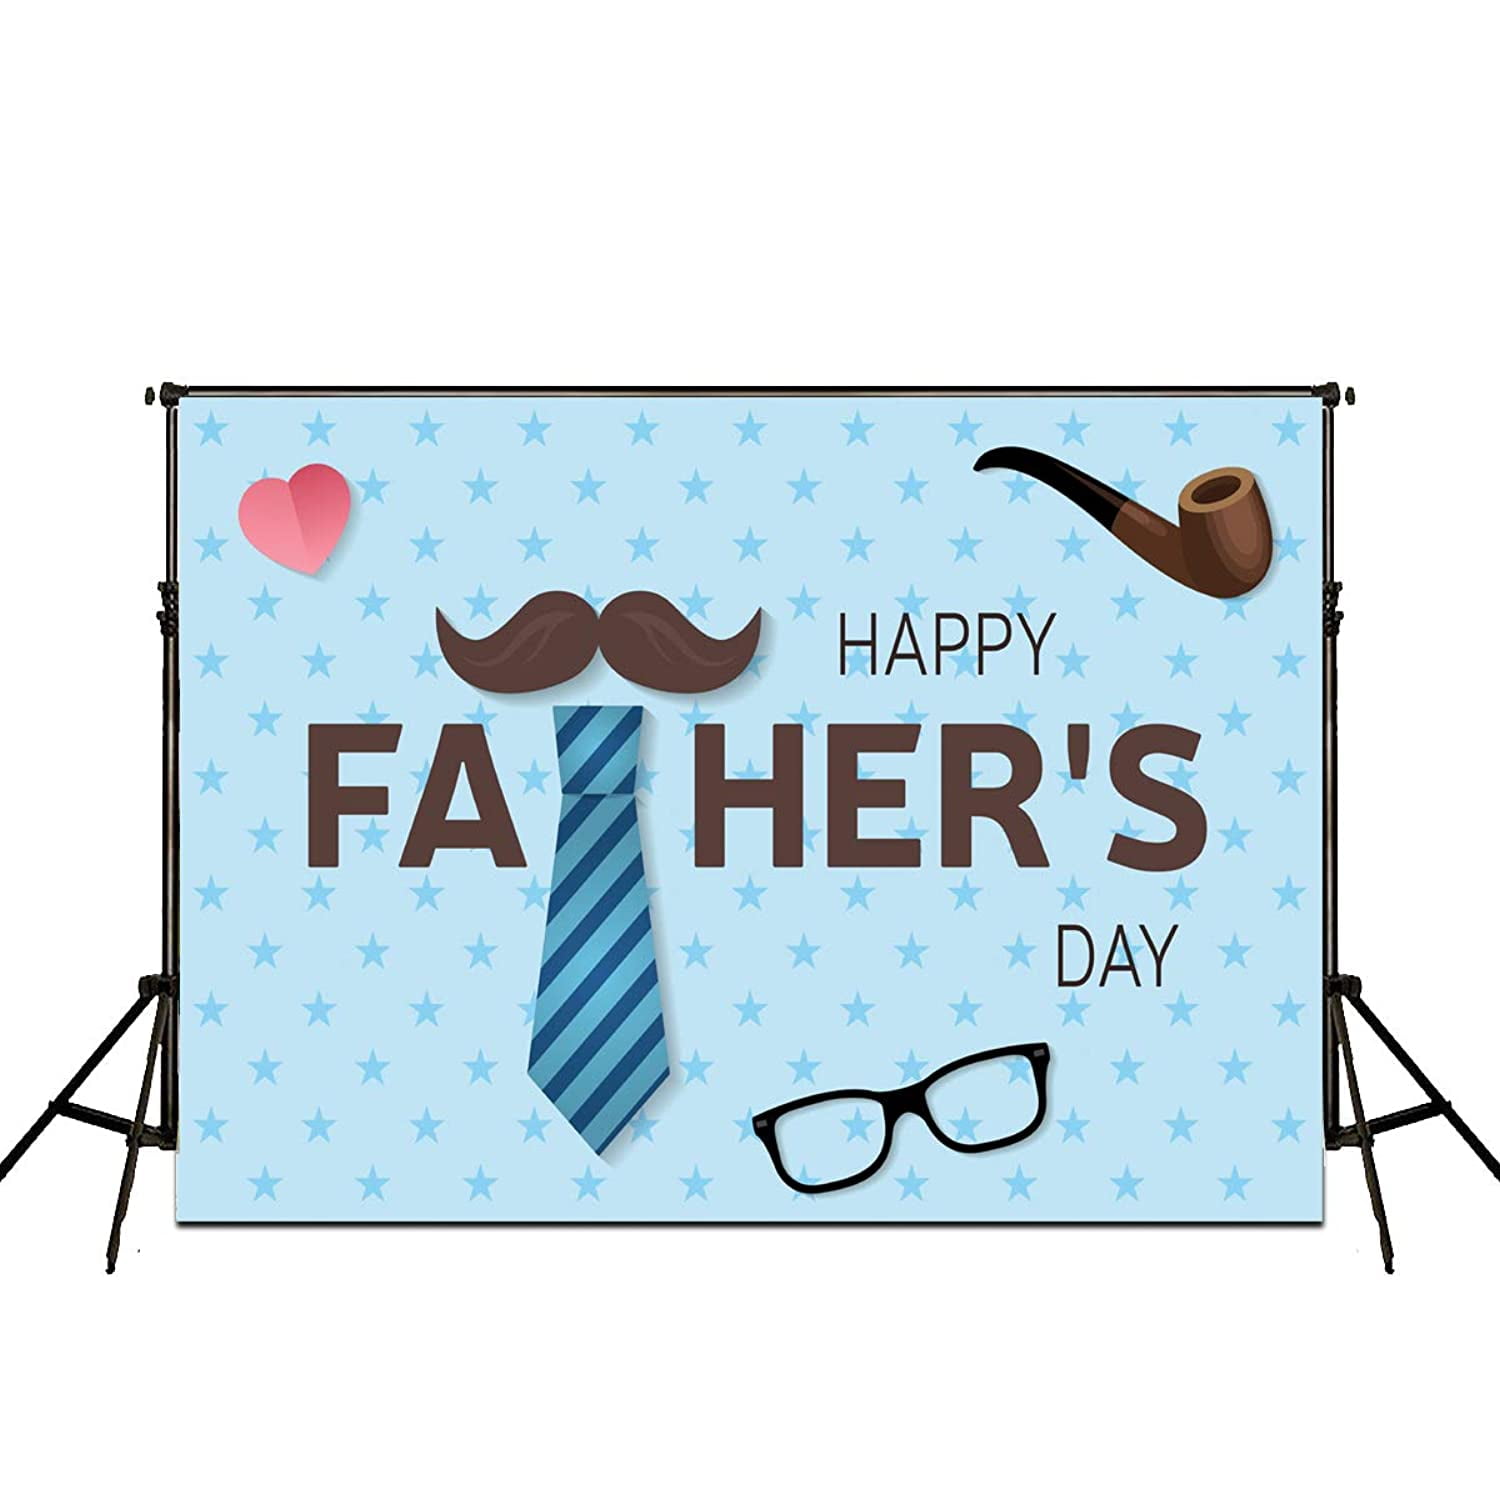 Dudaacvt 7x5ft Happy Fathers Day Backdrop Blue Background Tie Photography Studio Props Party Decoration D433